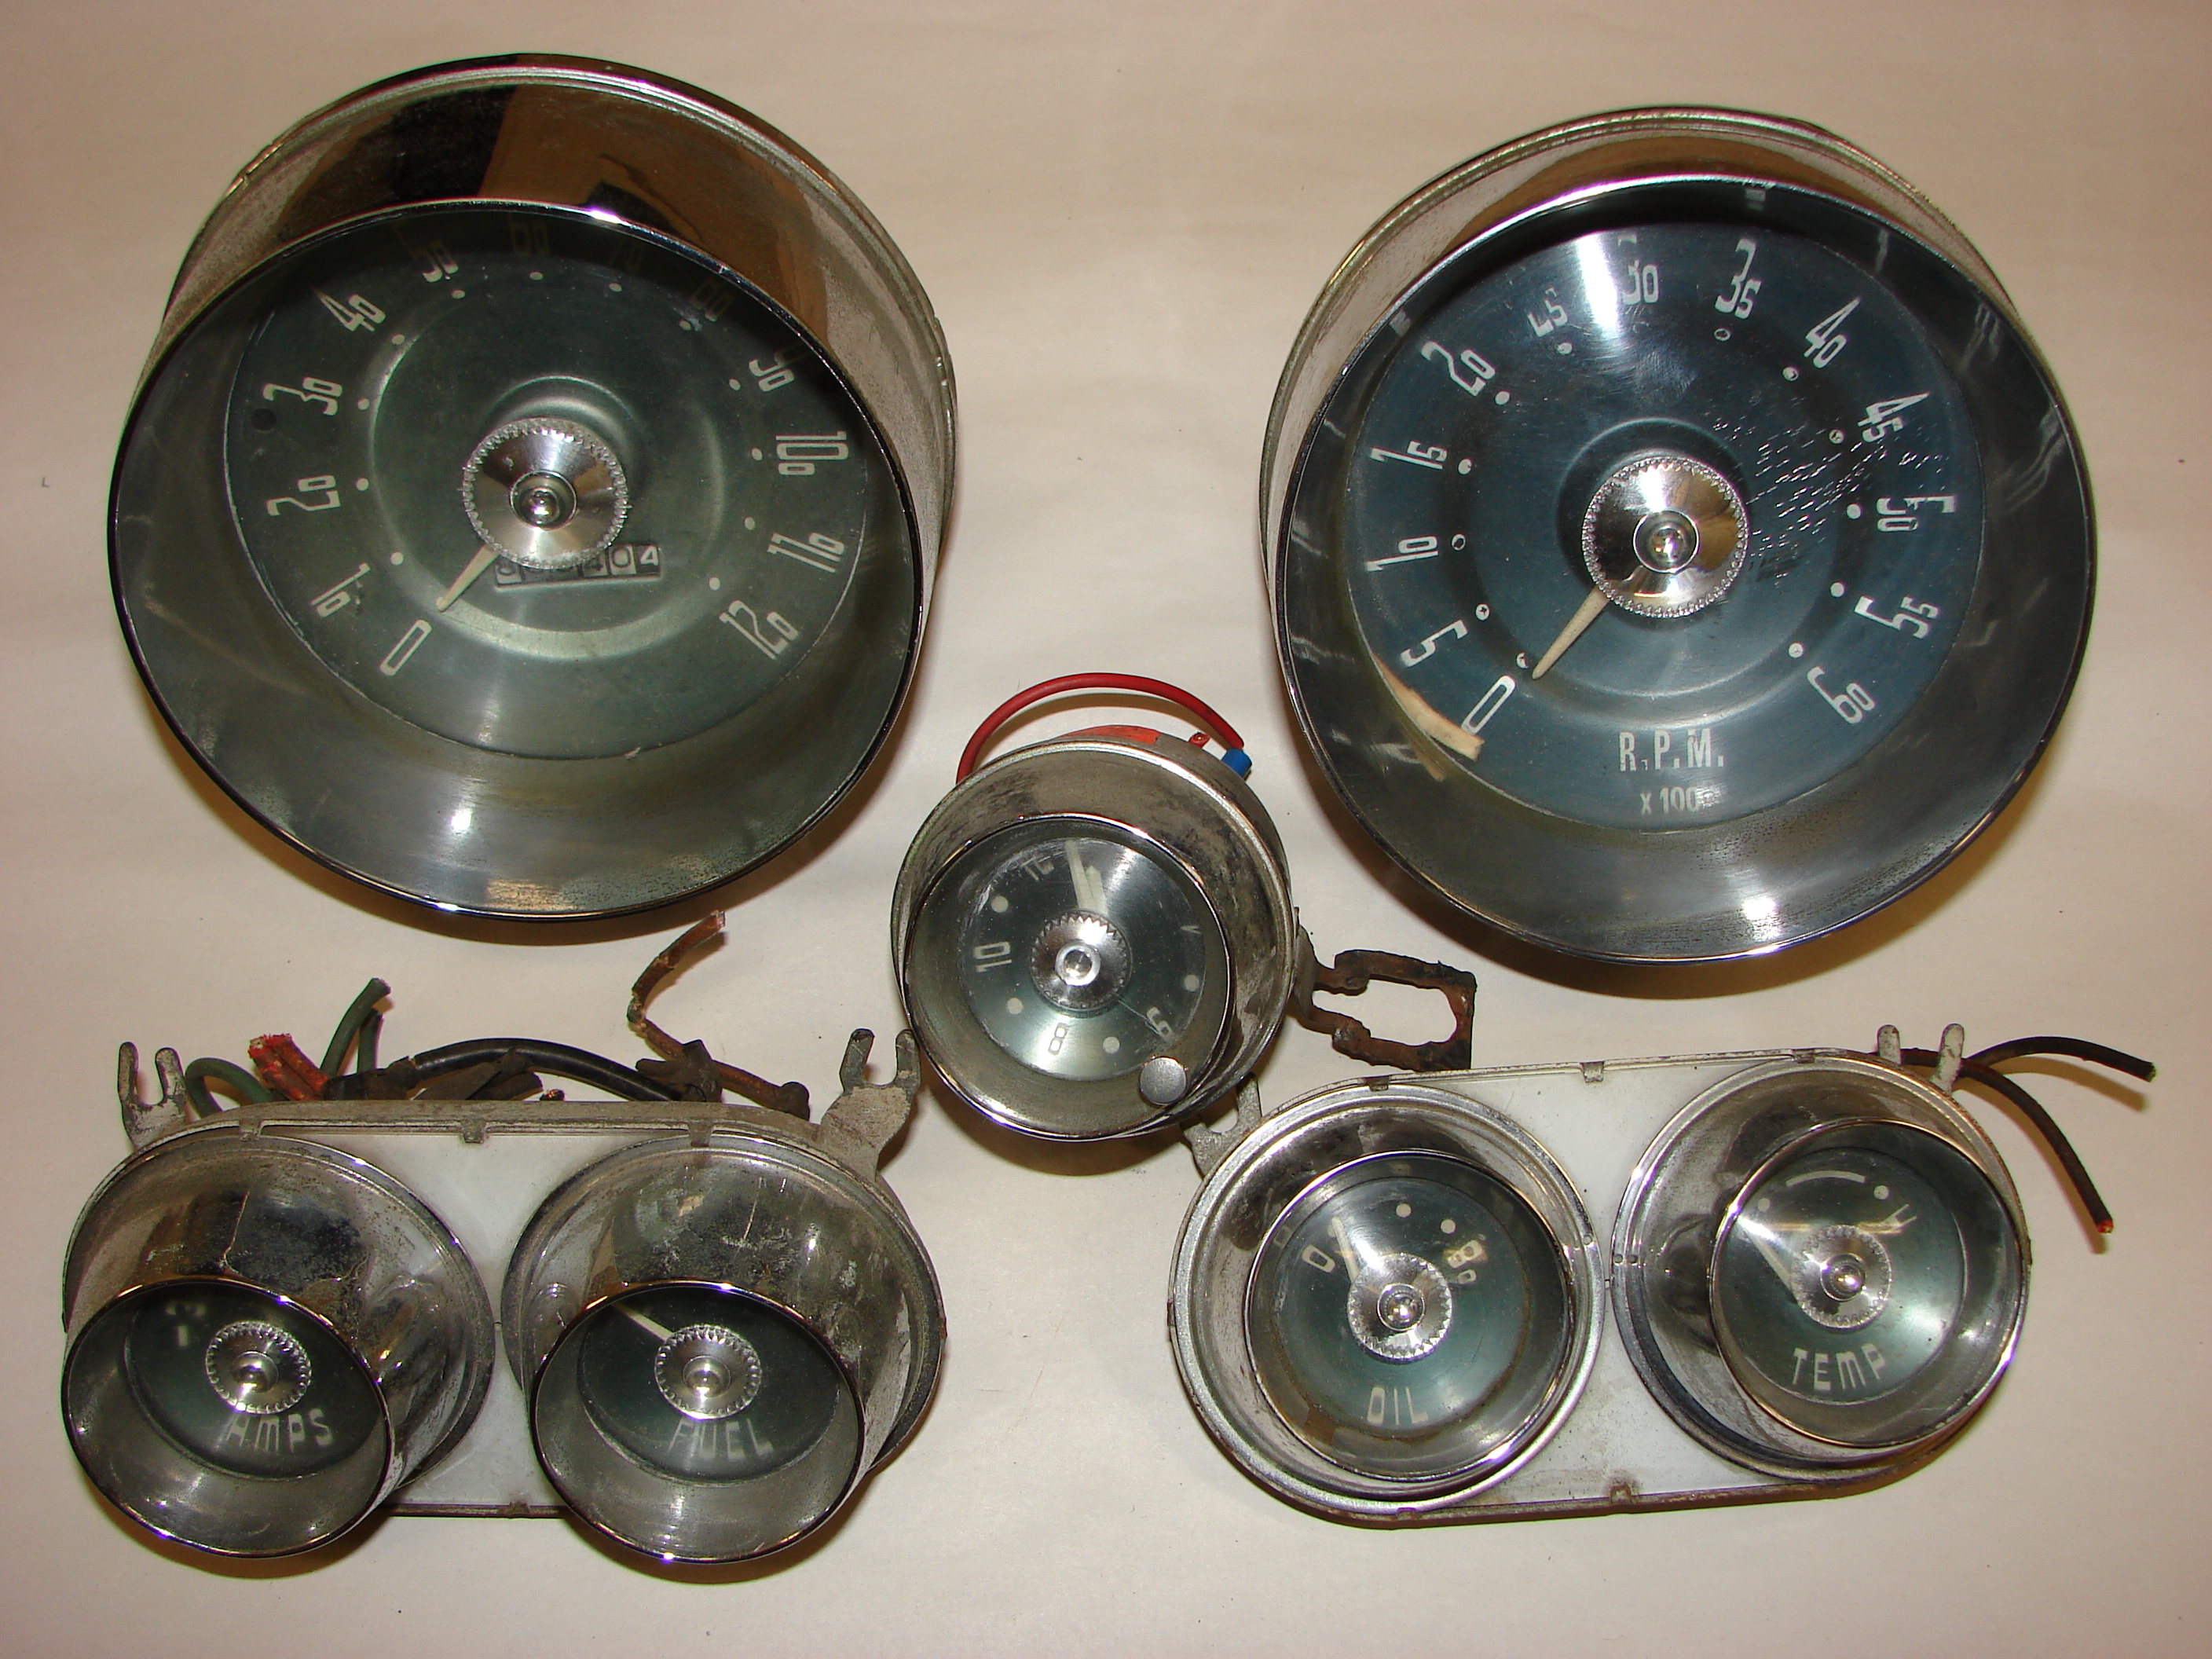 Old basic speedometers and car devices